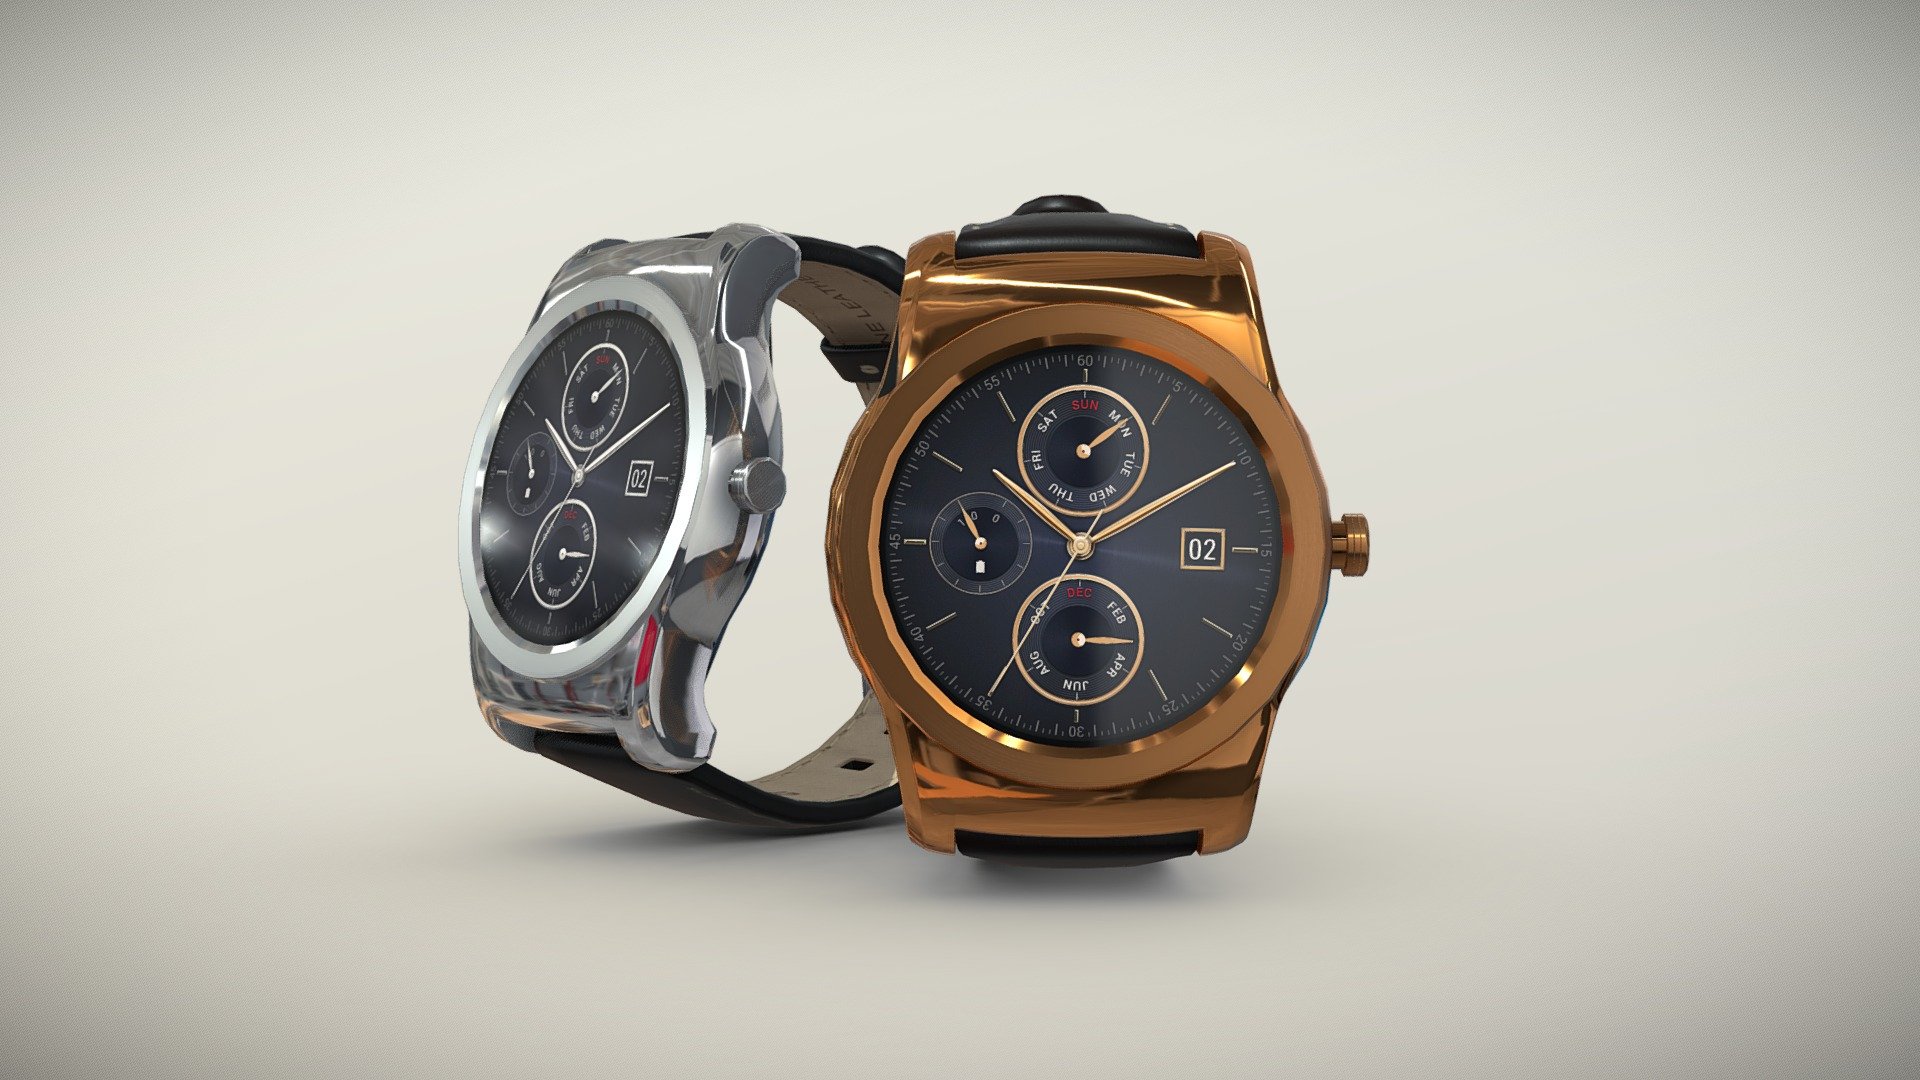 •   Let me present to you high-quality low-poly 3D model LG Watch Urbane W150. Model is presented in two colors: Silver and Gold. Modeling was made with ortho-photos of real watch that is why all details of design are recreated most authentically.

•    This model consists of one mesh, it is low-polygonal and it has only one material for each color version. 

•   The total of the main textures is 5. Resolution of all textures is 4096 pixels square aspect ratio in .png format. Also there is original texture file .PSD format in separate archive.

•   Polygon count of the model is – 4631.

•   The model has correct dimensions in real-world scale. All parts grouped and named correctly.

•   To use the model in other 3D programs there are scenes saved in formats .fbx, .obj, .DAE, .max (2010 version).

Note: If you see some artifacts on the textures, it means compression works in the Viewer. We recommend setting HD quality for textures. But anyway, original textures have no artifacts 3d model